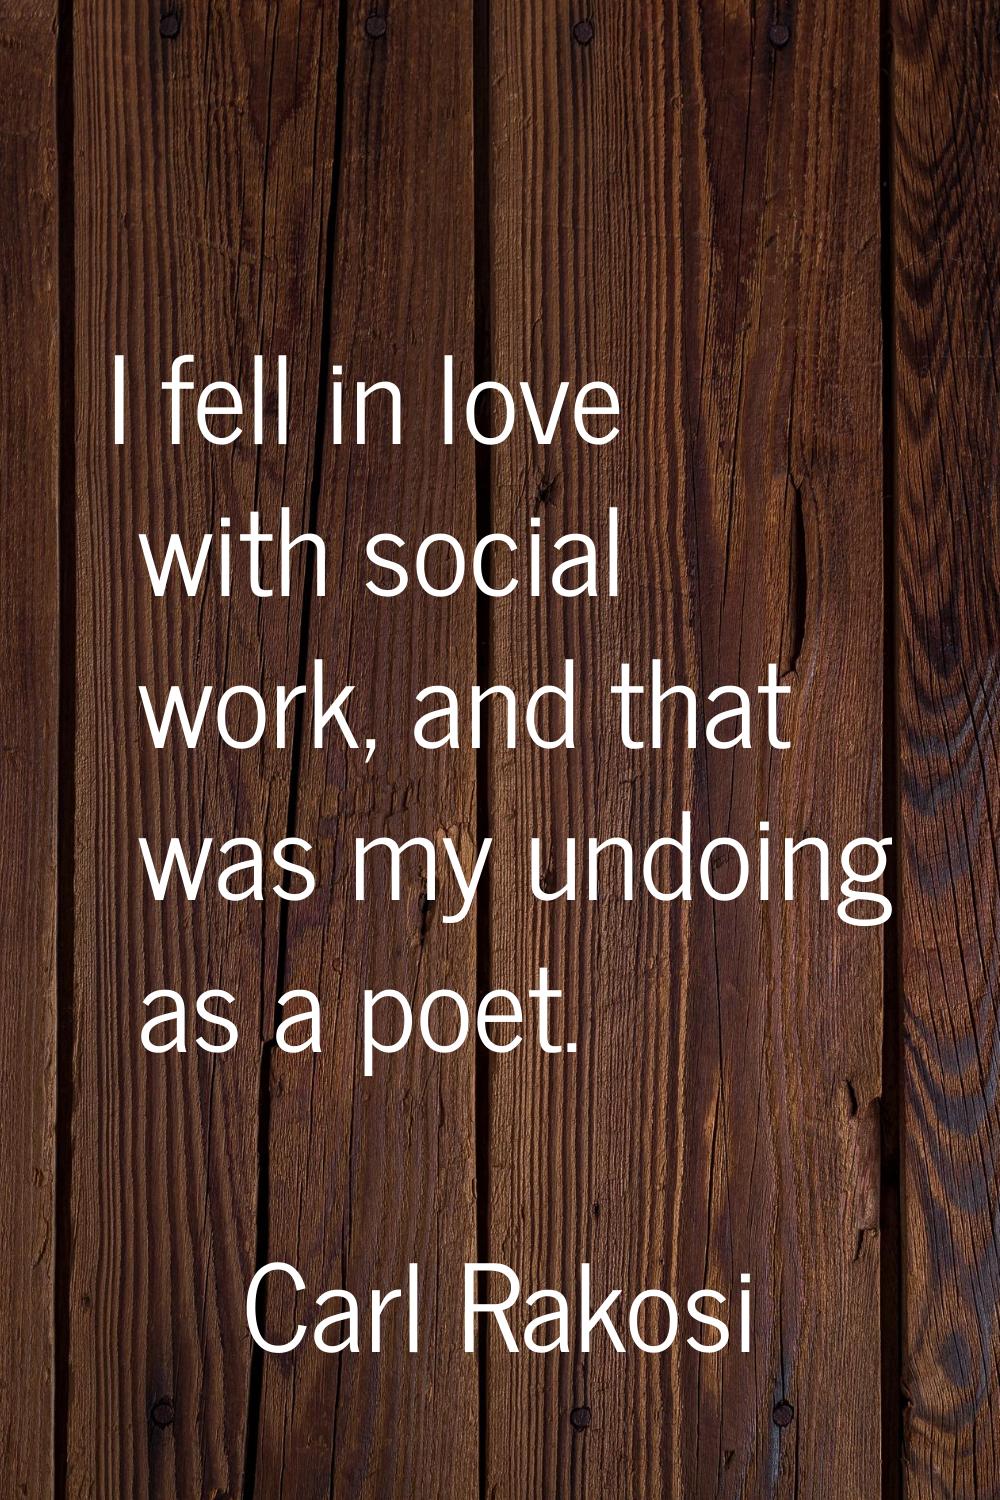 I fell in love with social work, and that was my undoing as a poet.